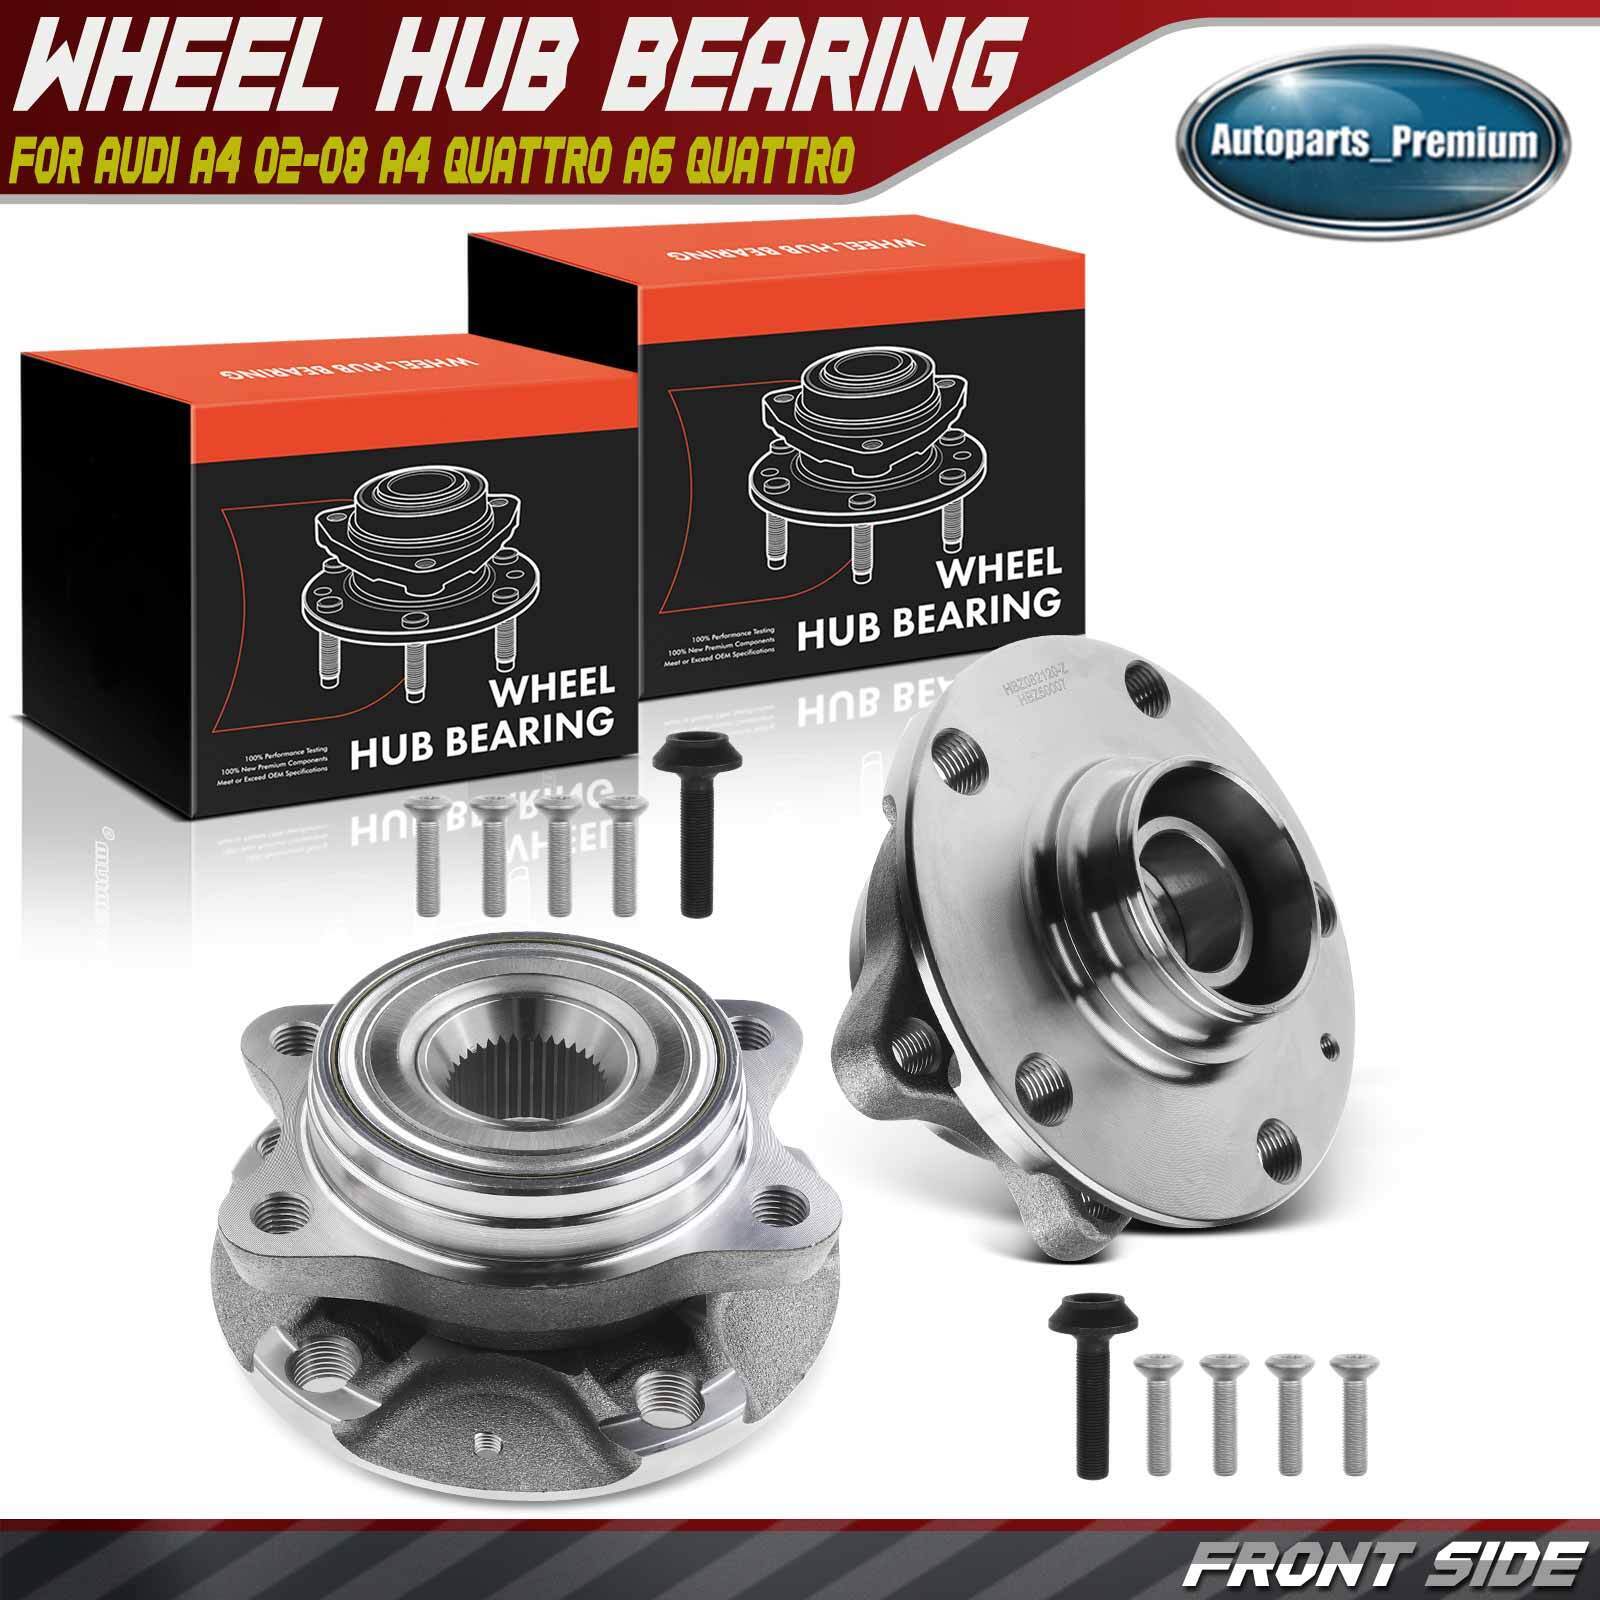 2x Front Wheel Hub Bearing Assembly for Audi A4 2002-2008 A4 Quattro A6 Quattro